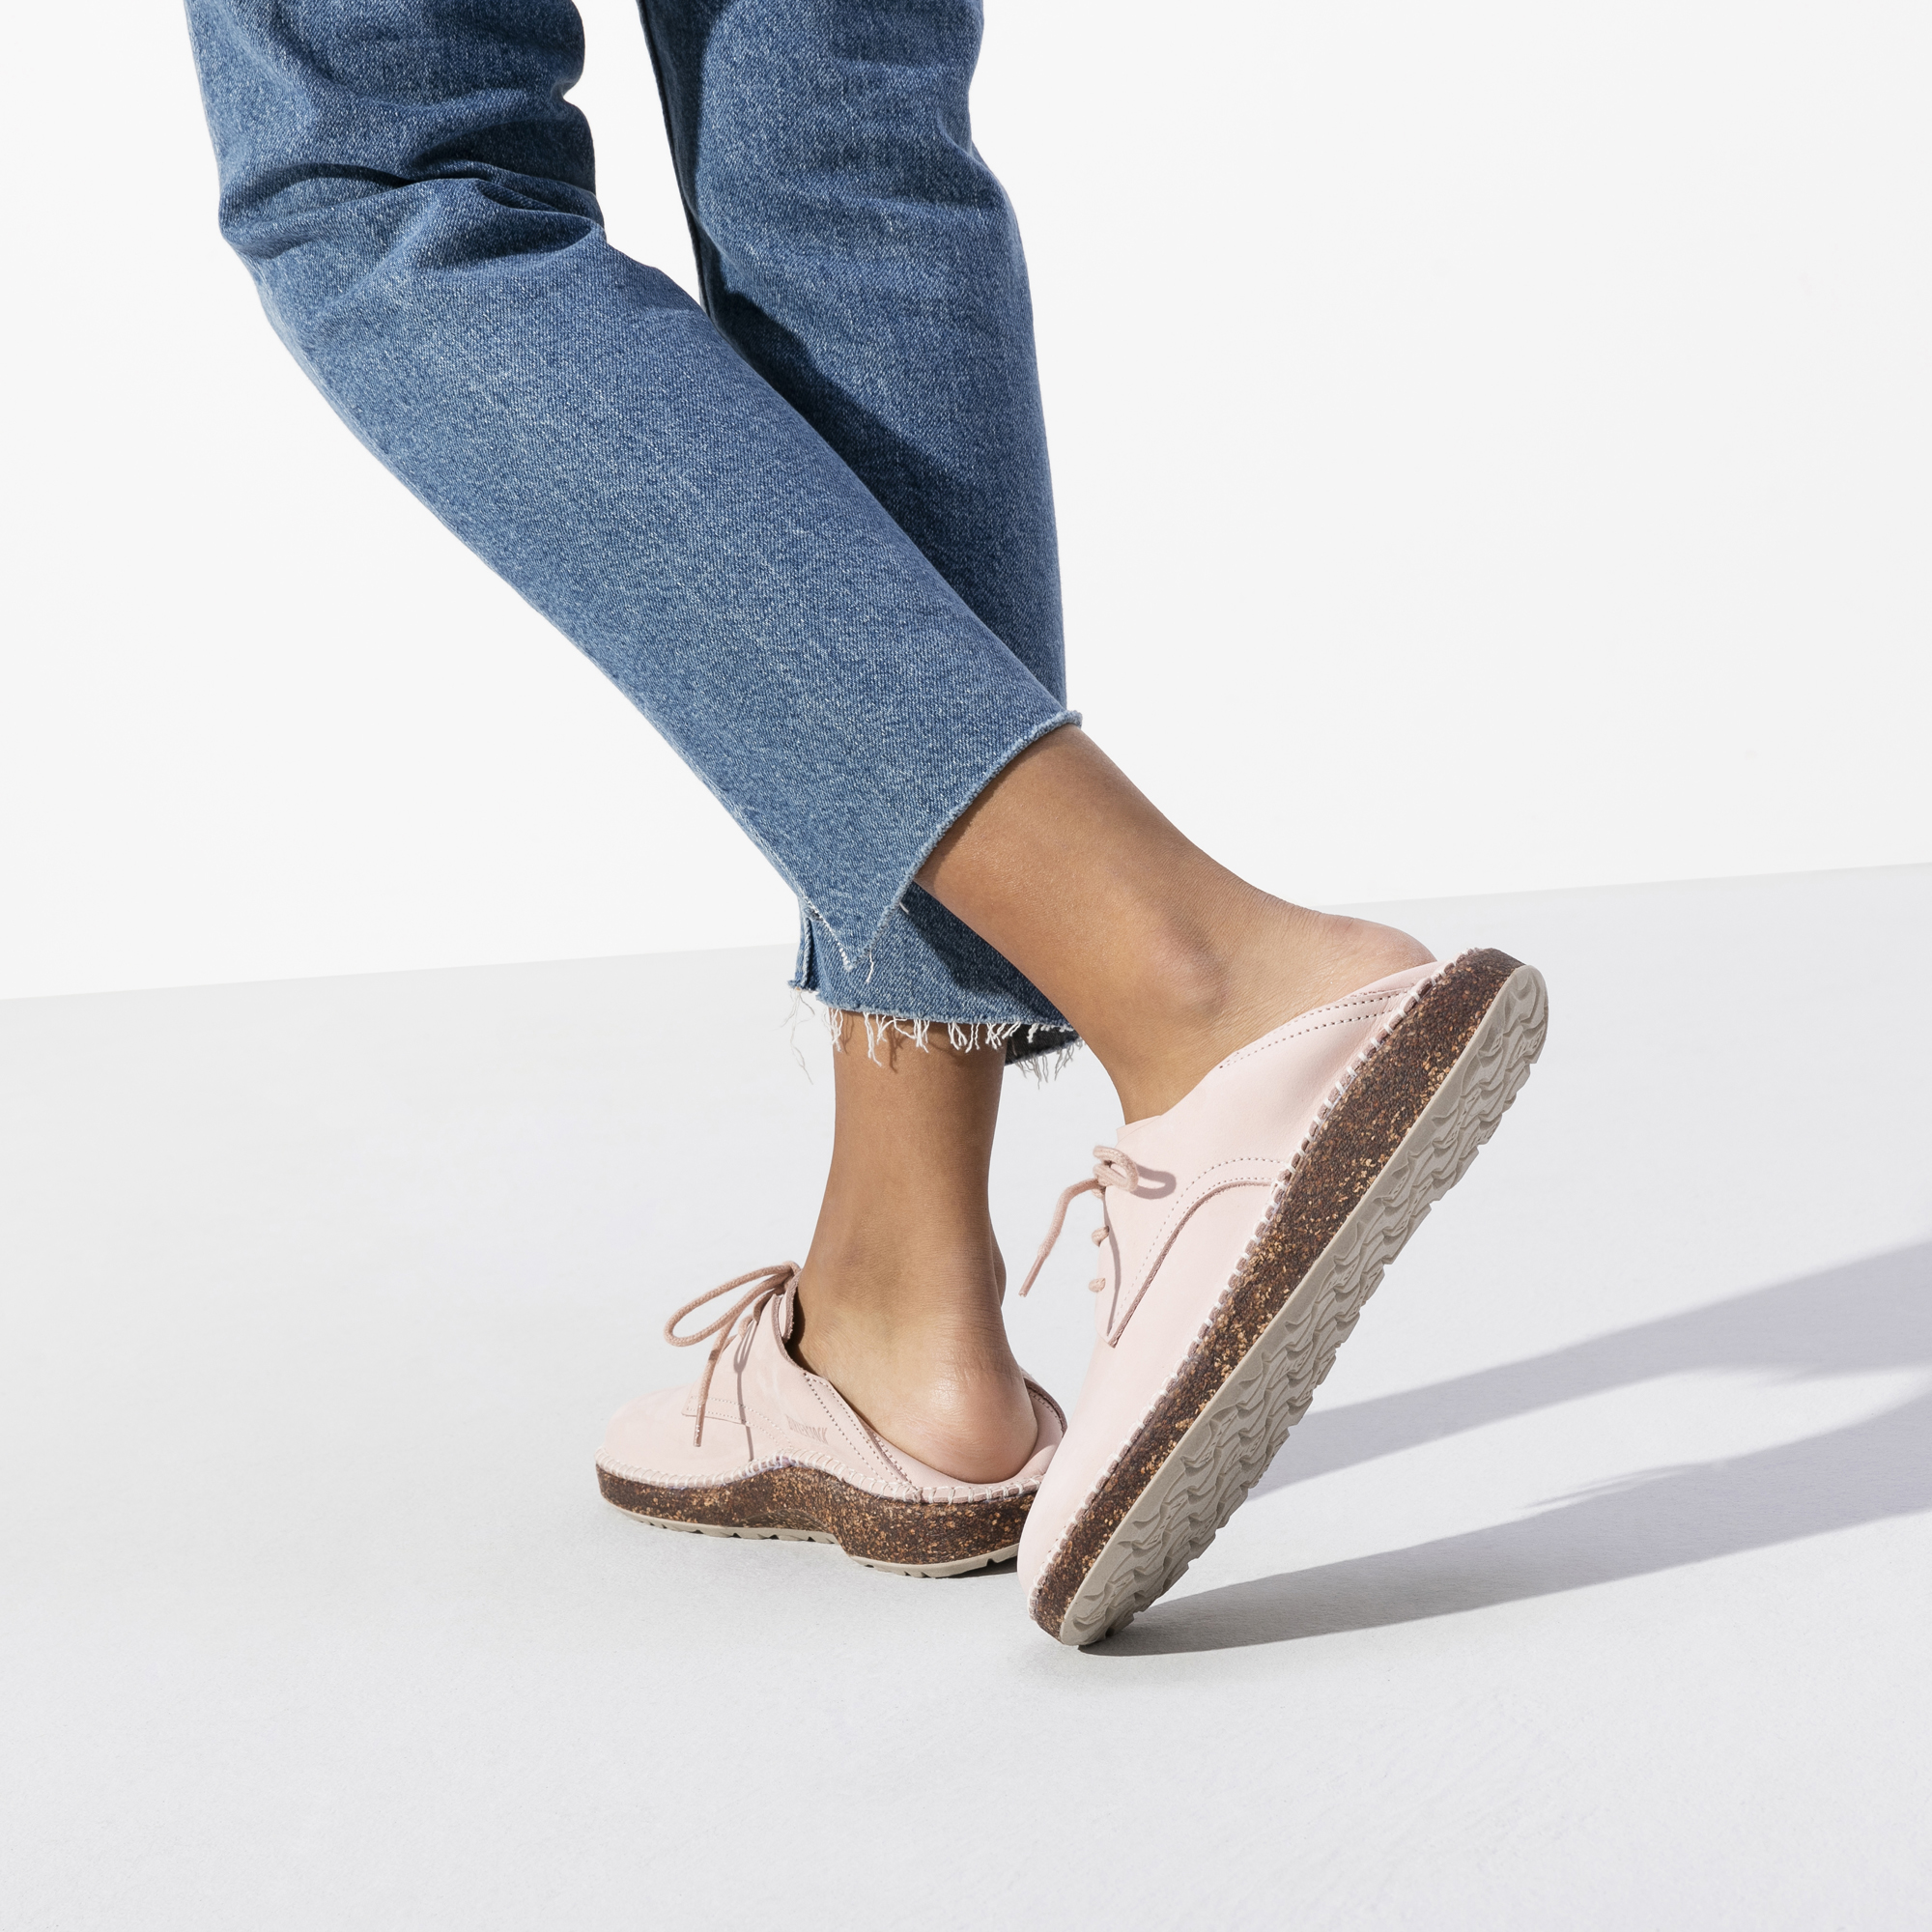 Gary Suede Leather Dusty Rose | shop 